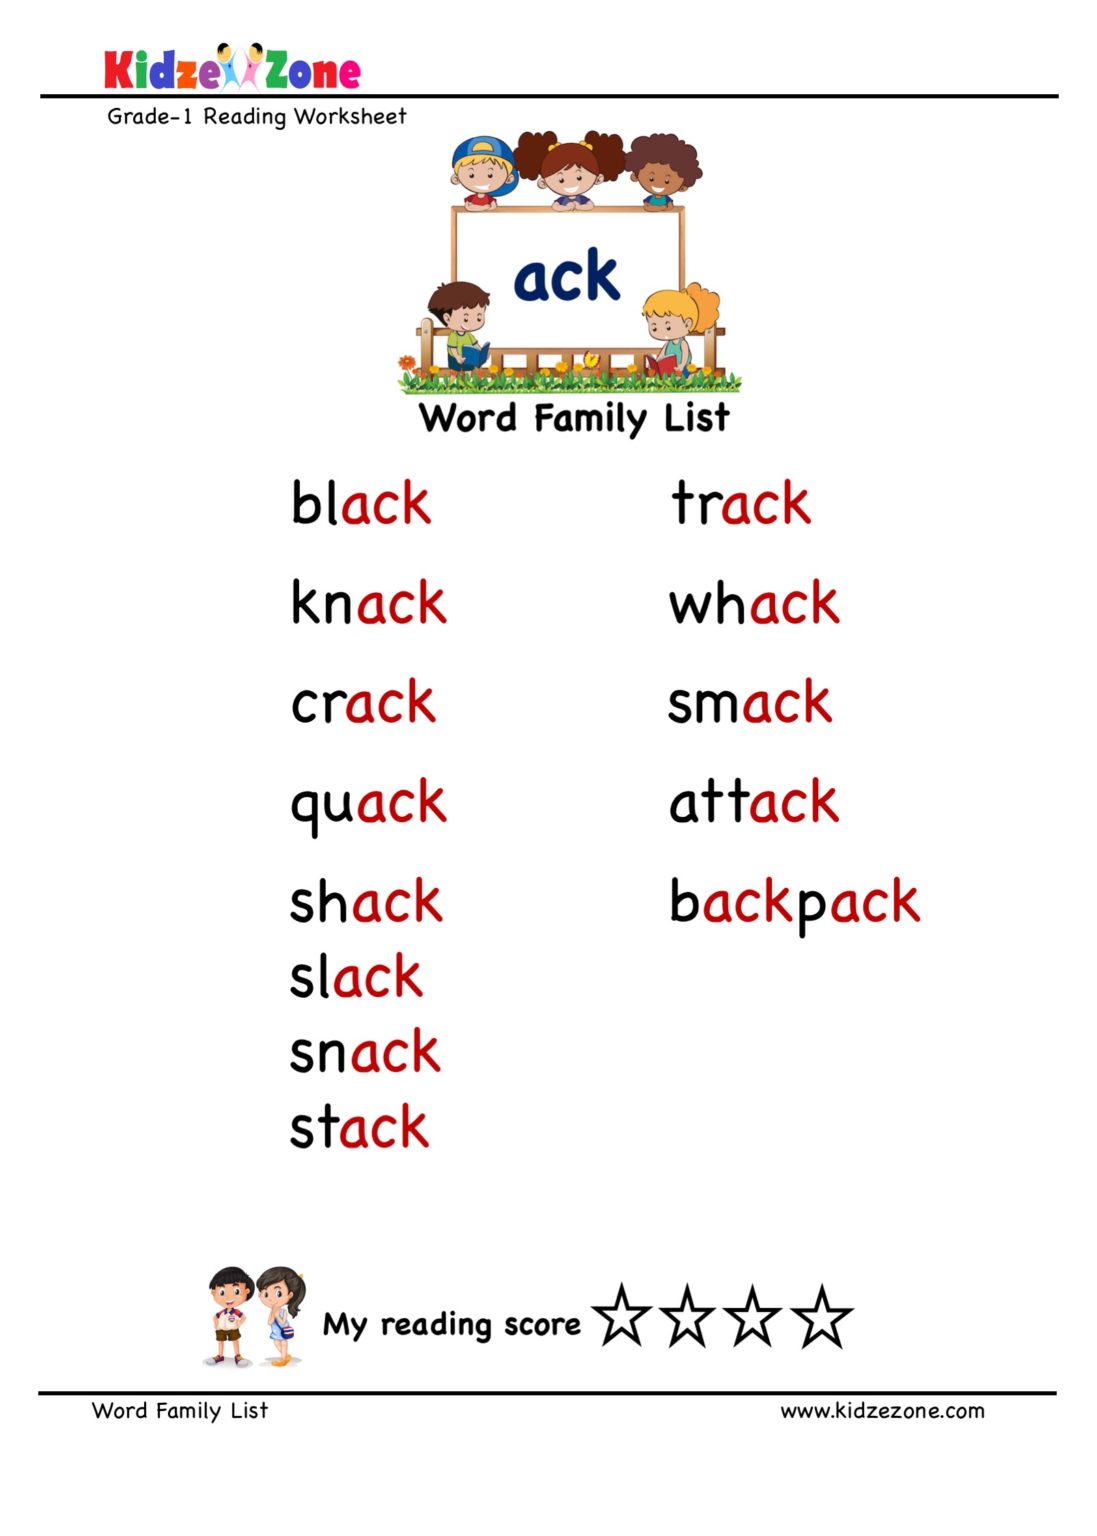 explore-and-learn-words-from-ack-word-family-with-word-list-worksheet